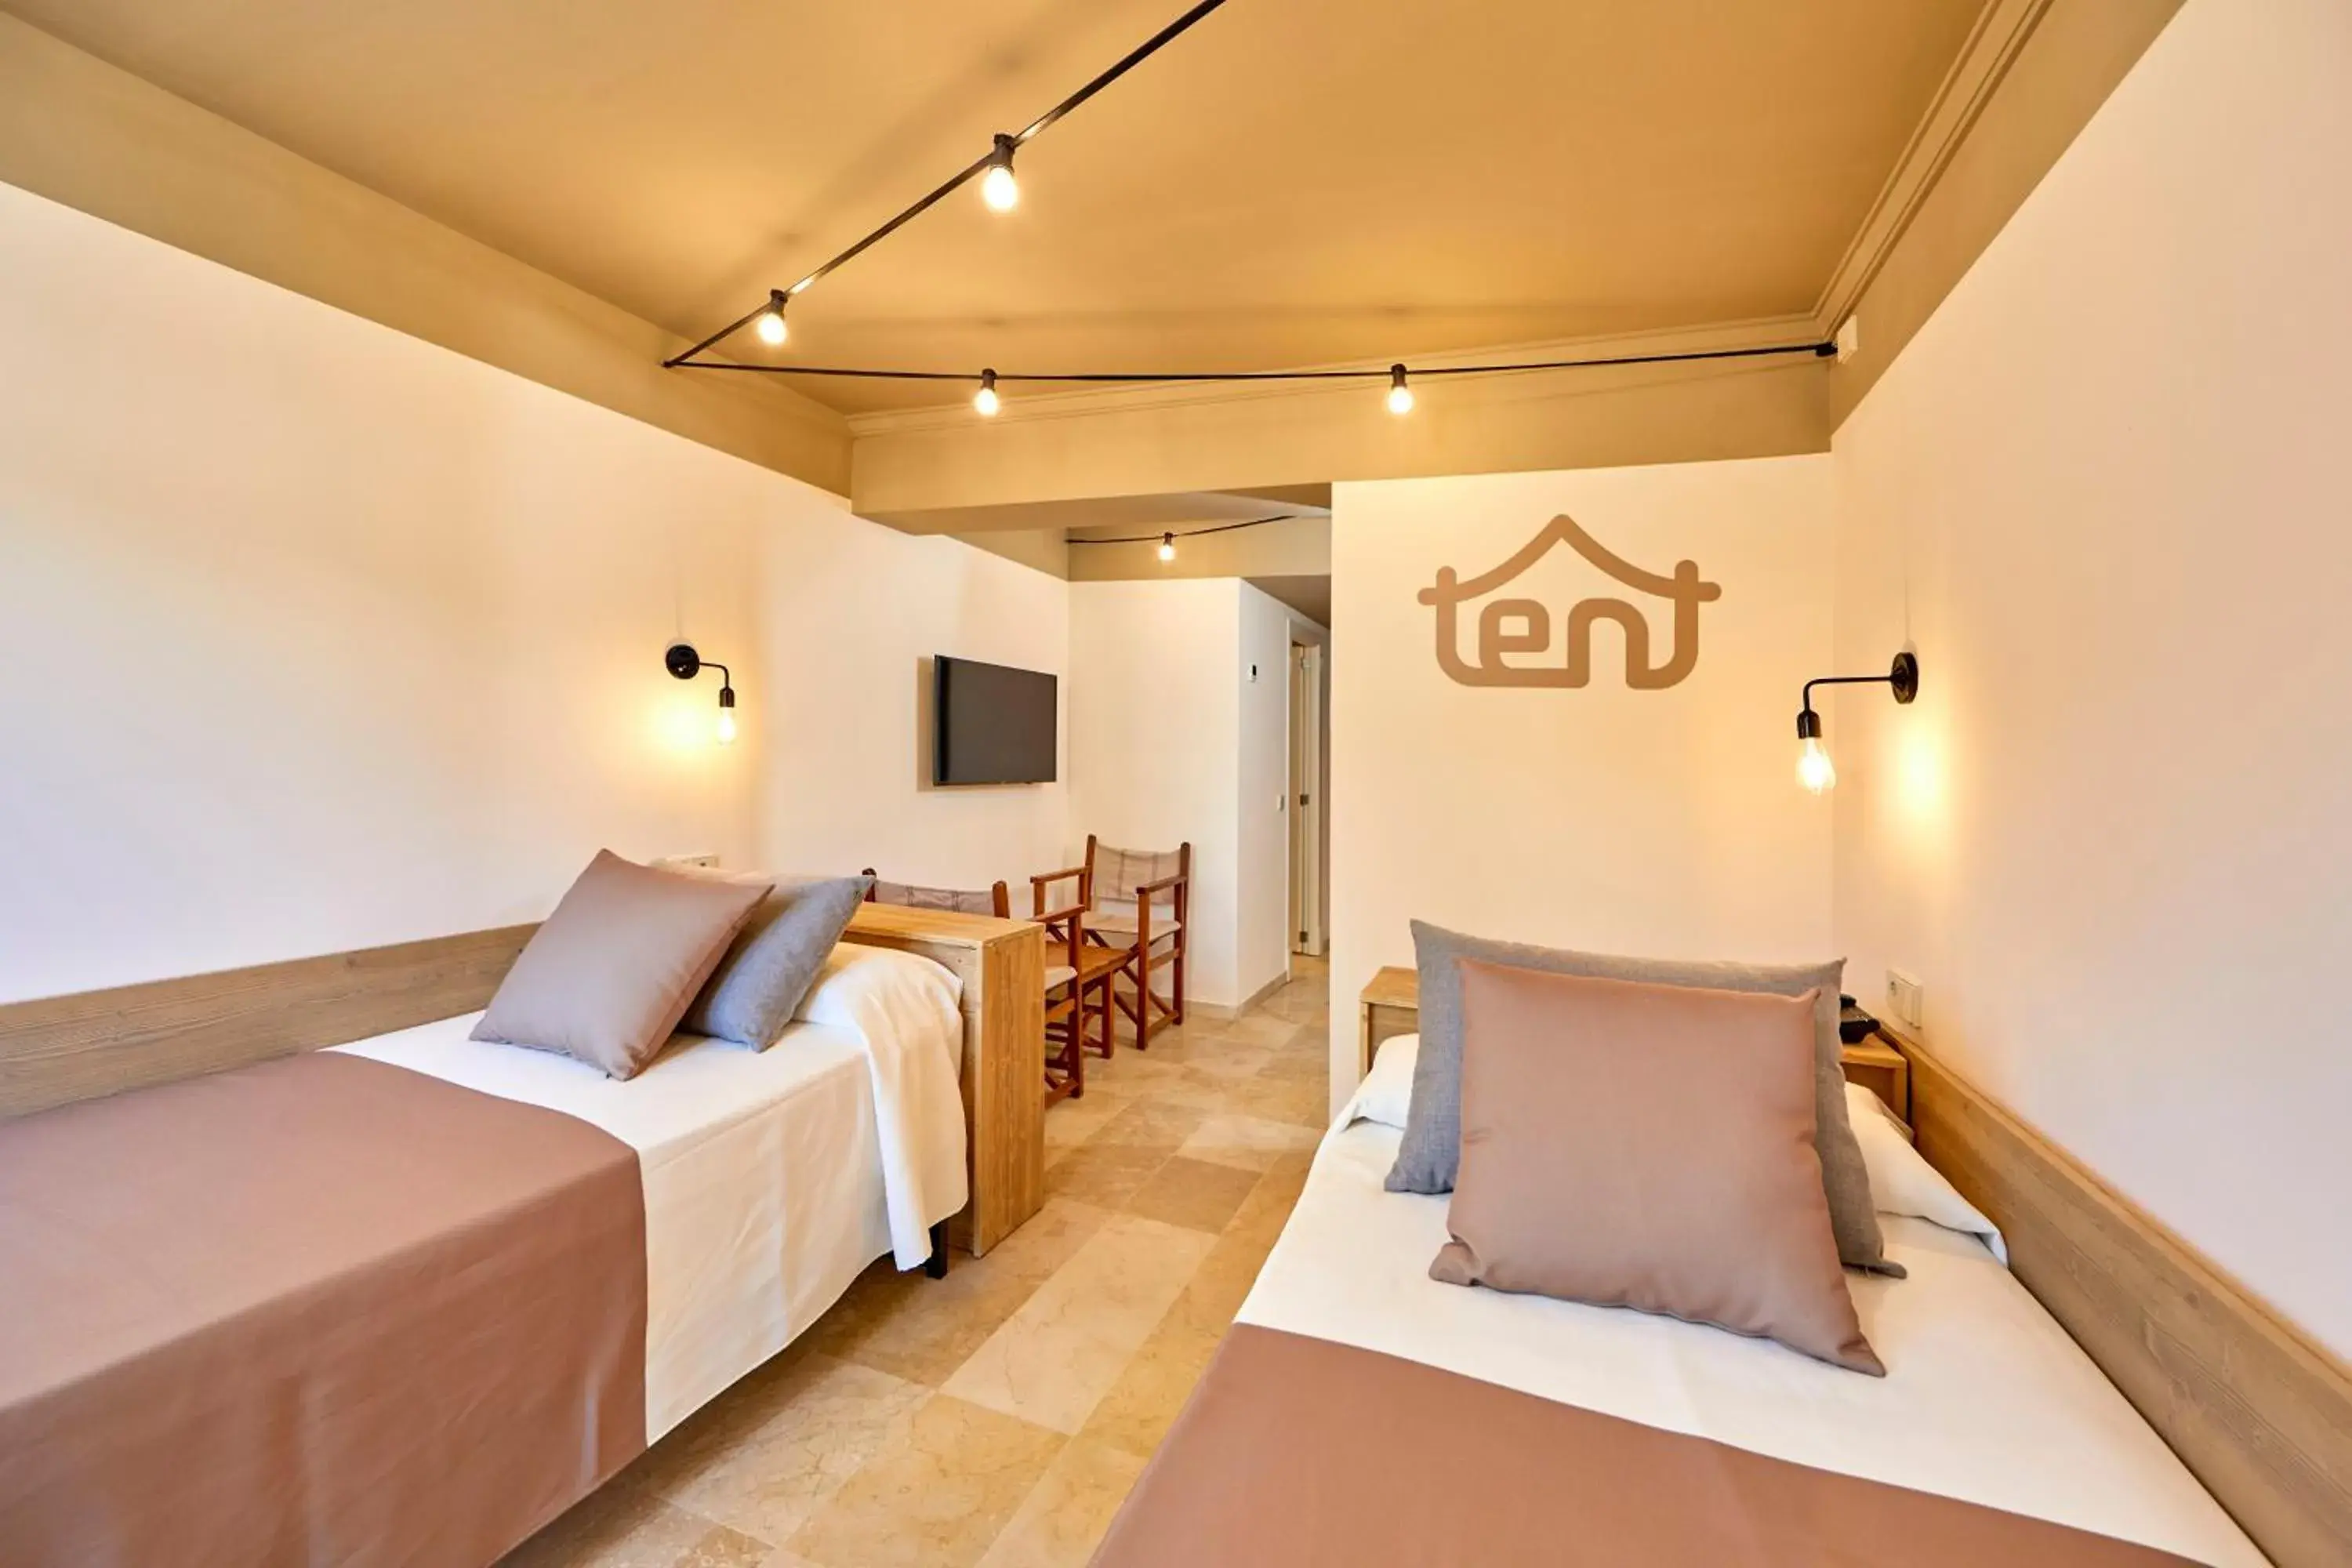 Double Room (1 Adult) - Unlimited Brunch in tent Capi Playa